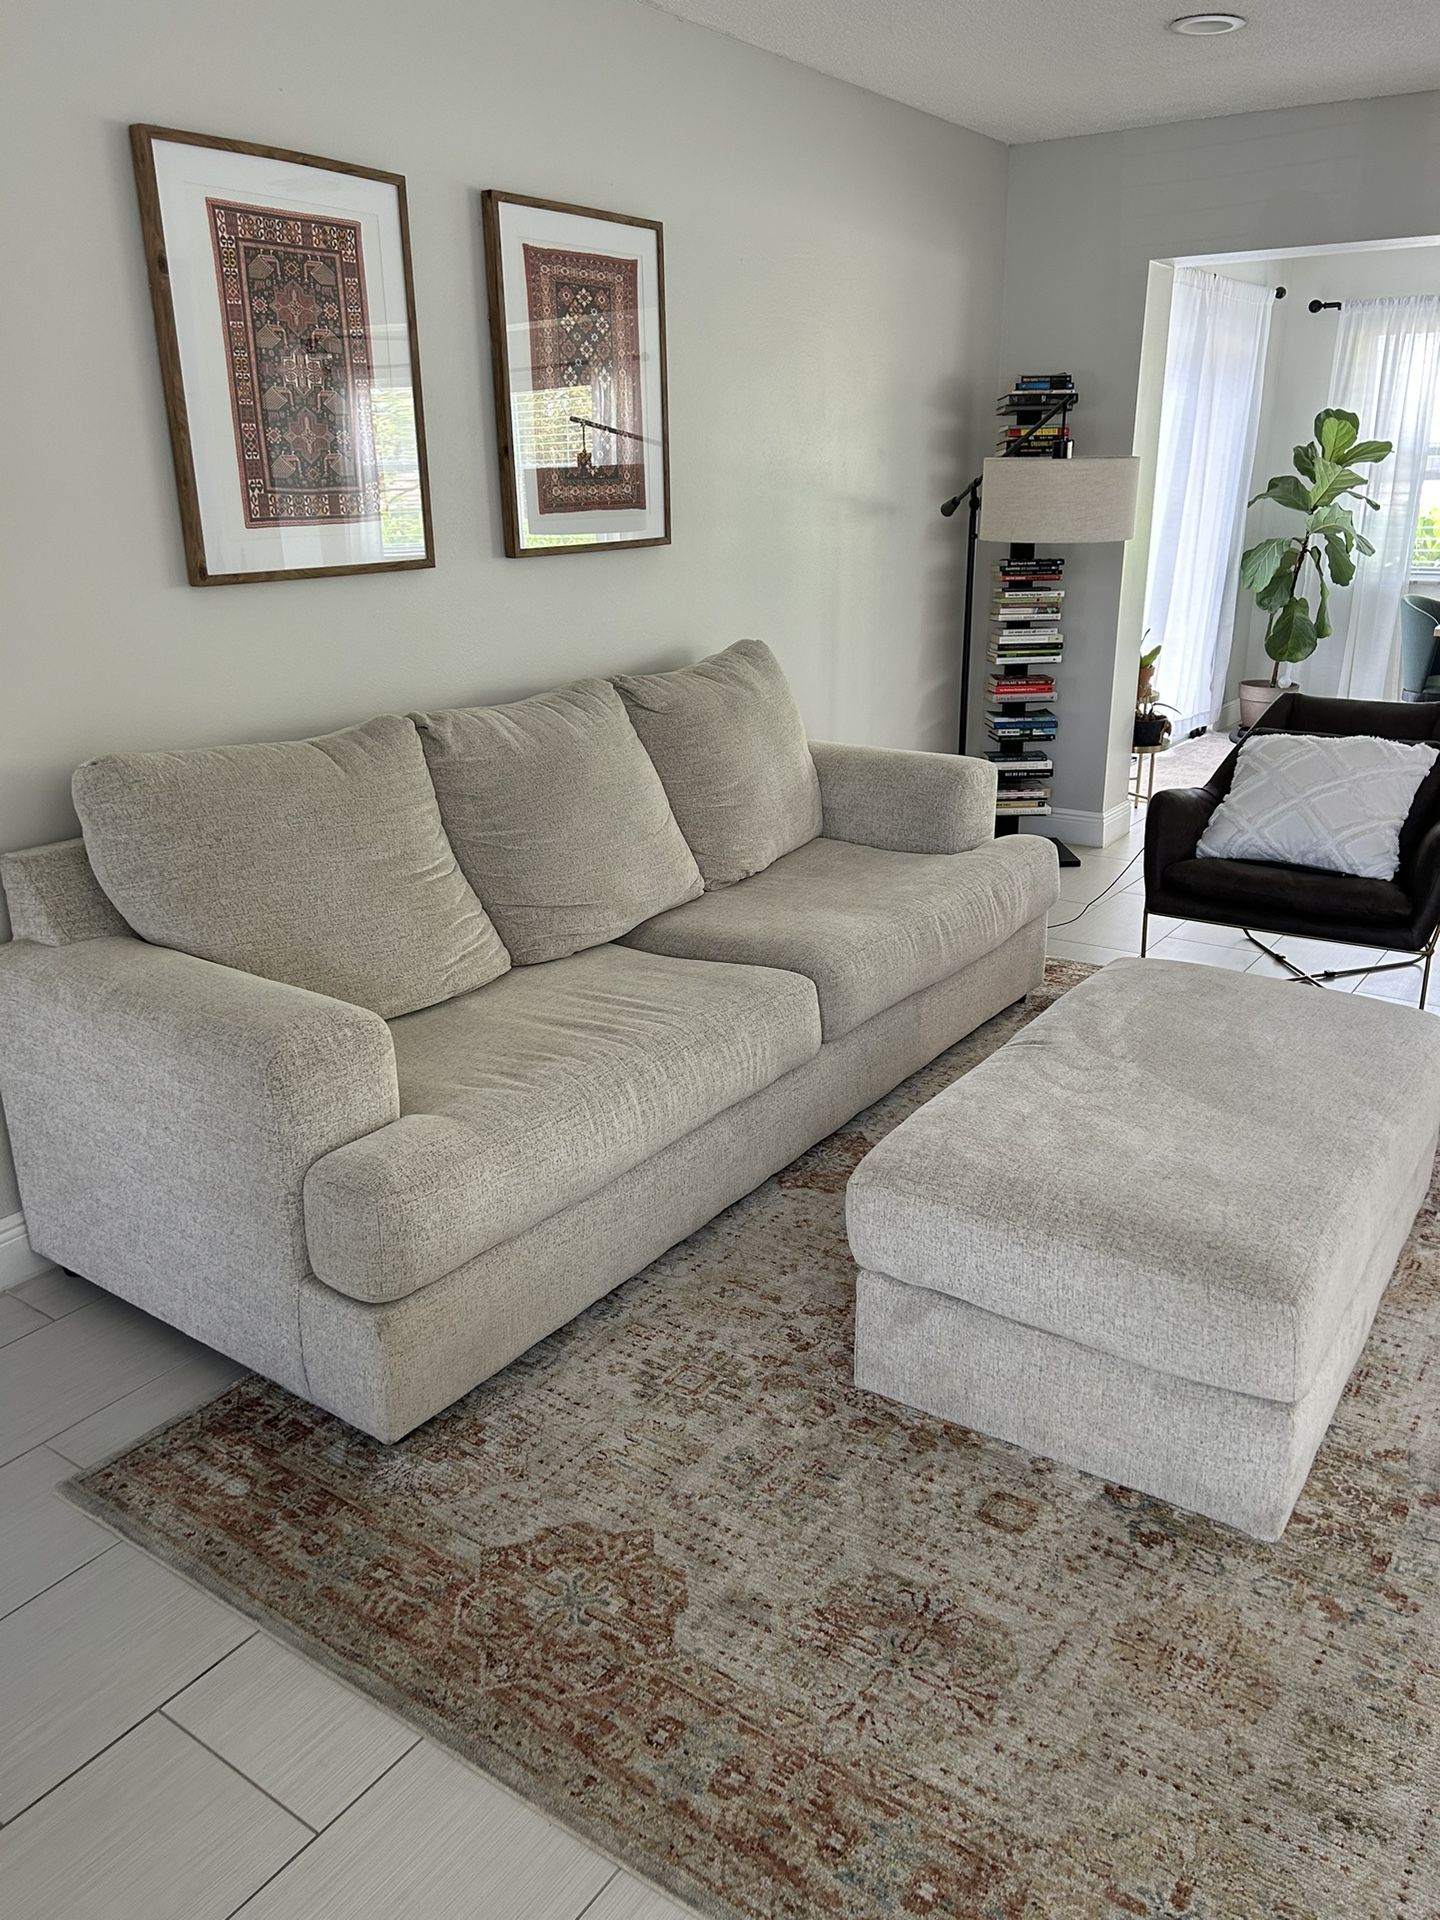 Beige Couch And Ottoman